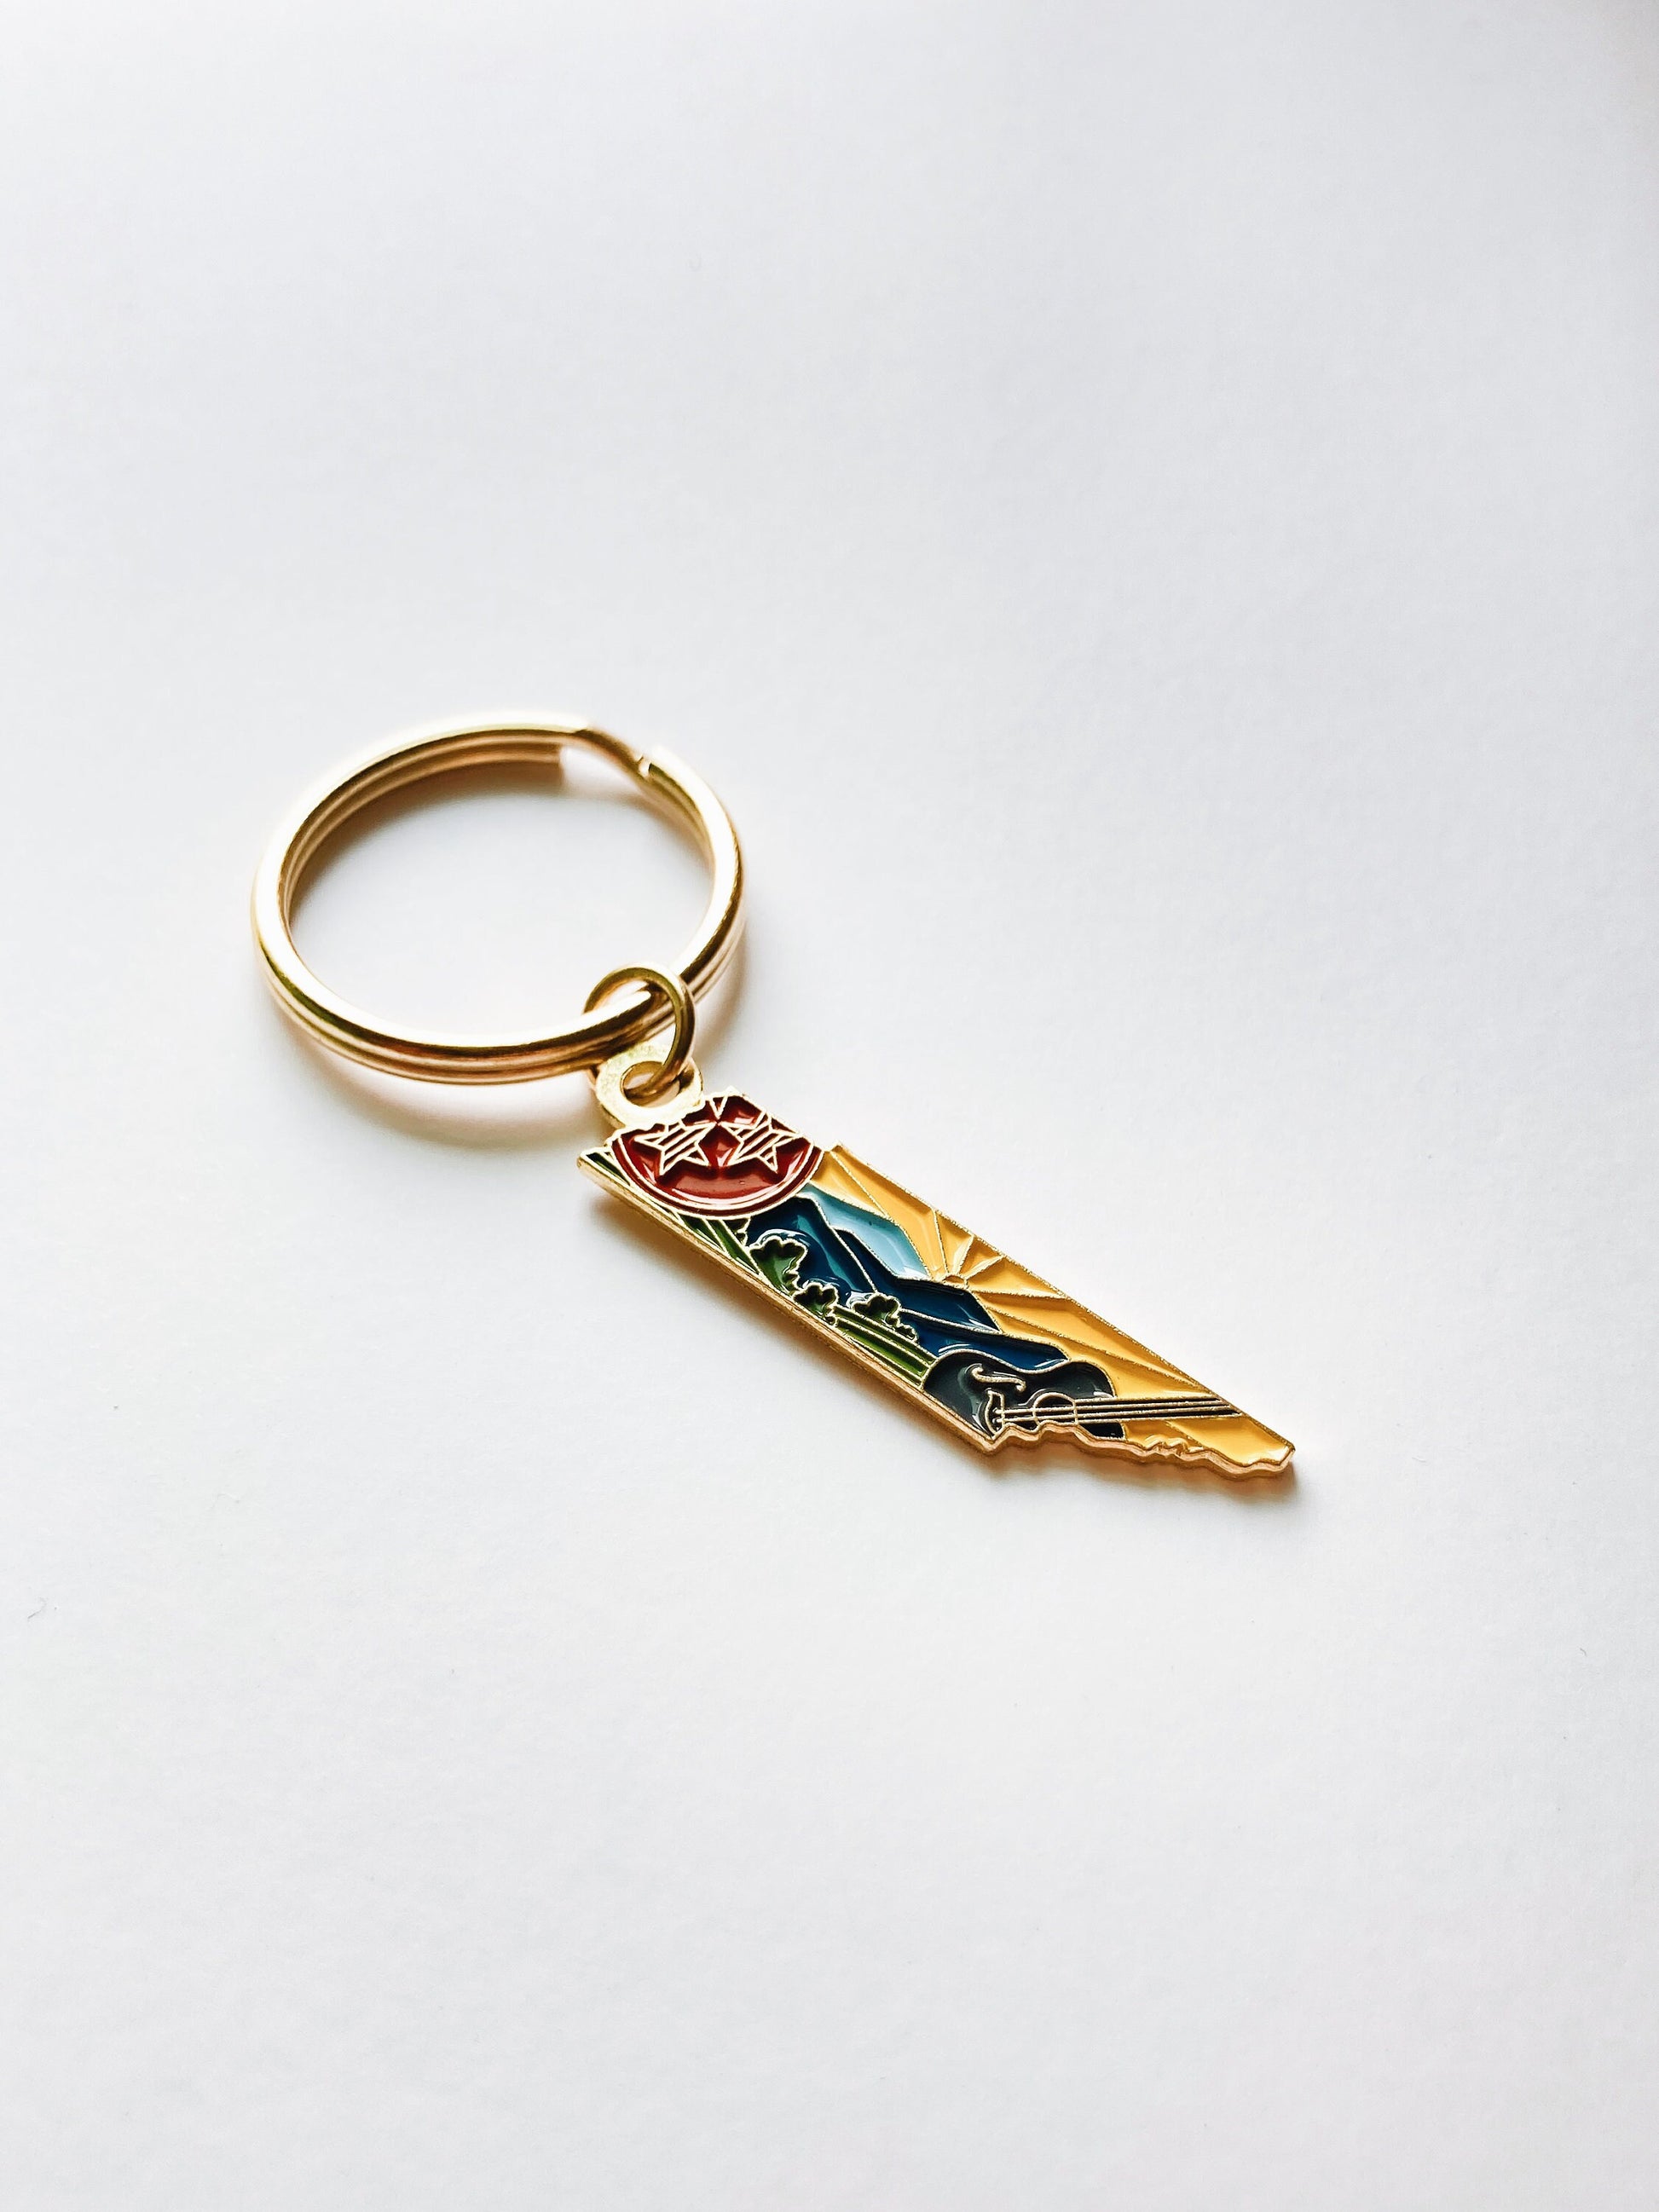 Tennessee Gold Enamel Keychain | Tennessee Outline Key Ring | Soft Enamel Illustrated State Keychain 1.5"